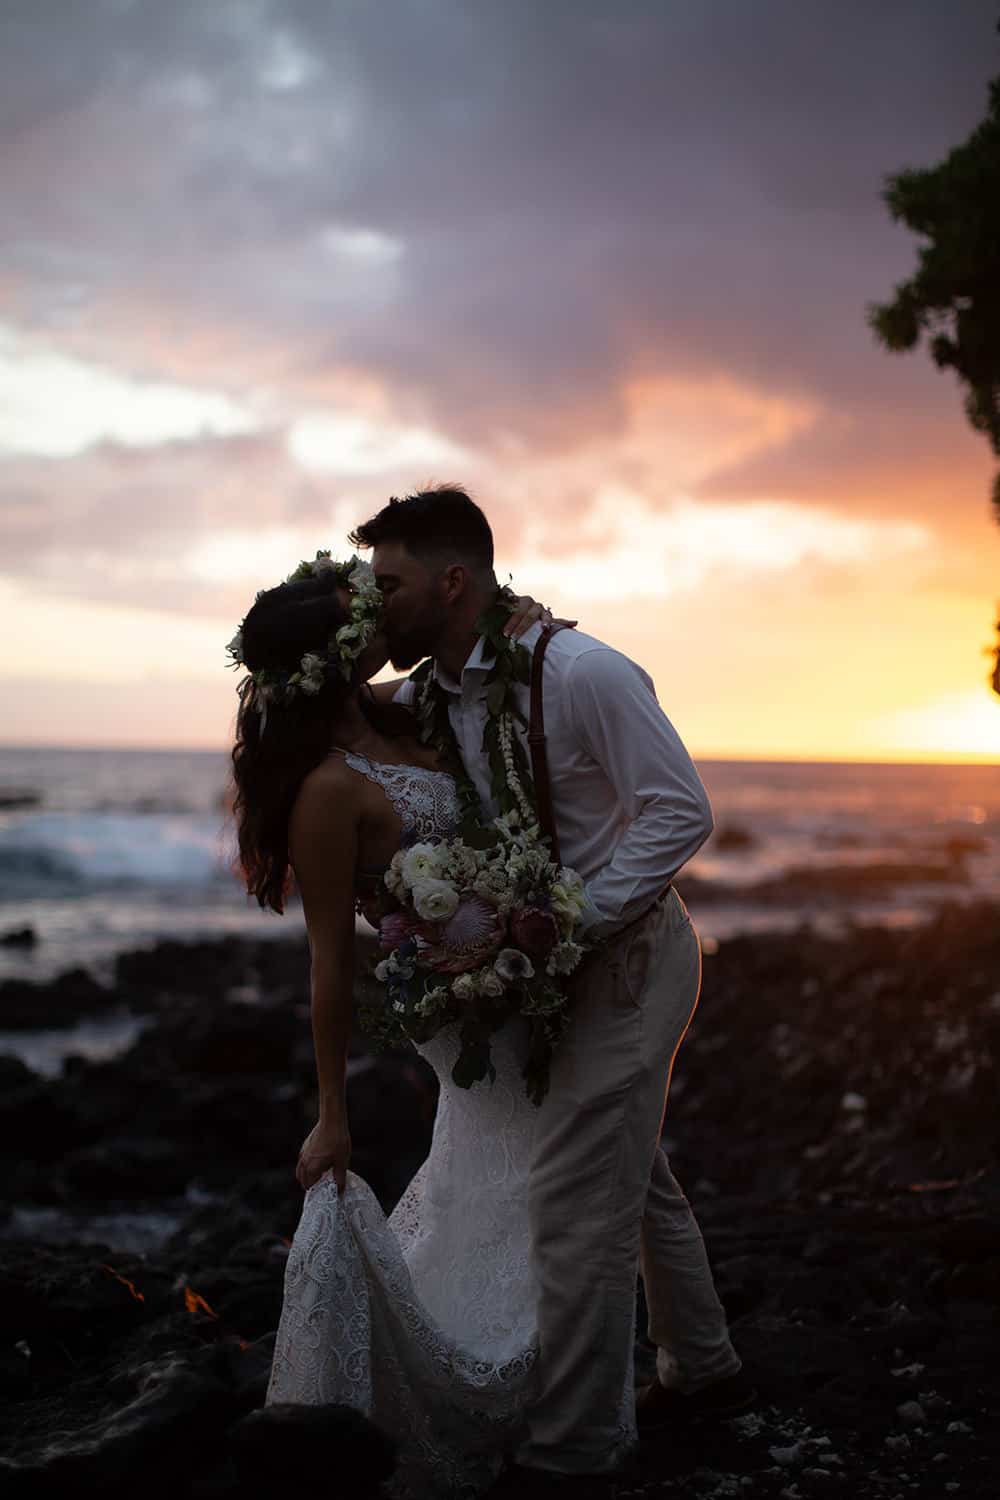 Need help editing? This blog includes my exact editing workflow and top tips for photographers looking to improve their business by Anela Benavides, Hawaii wedding and engagement photographer and photographer mentor #photography #editing #editingworkflow #editingtips